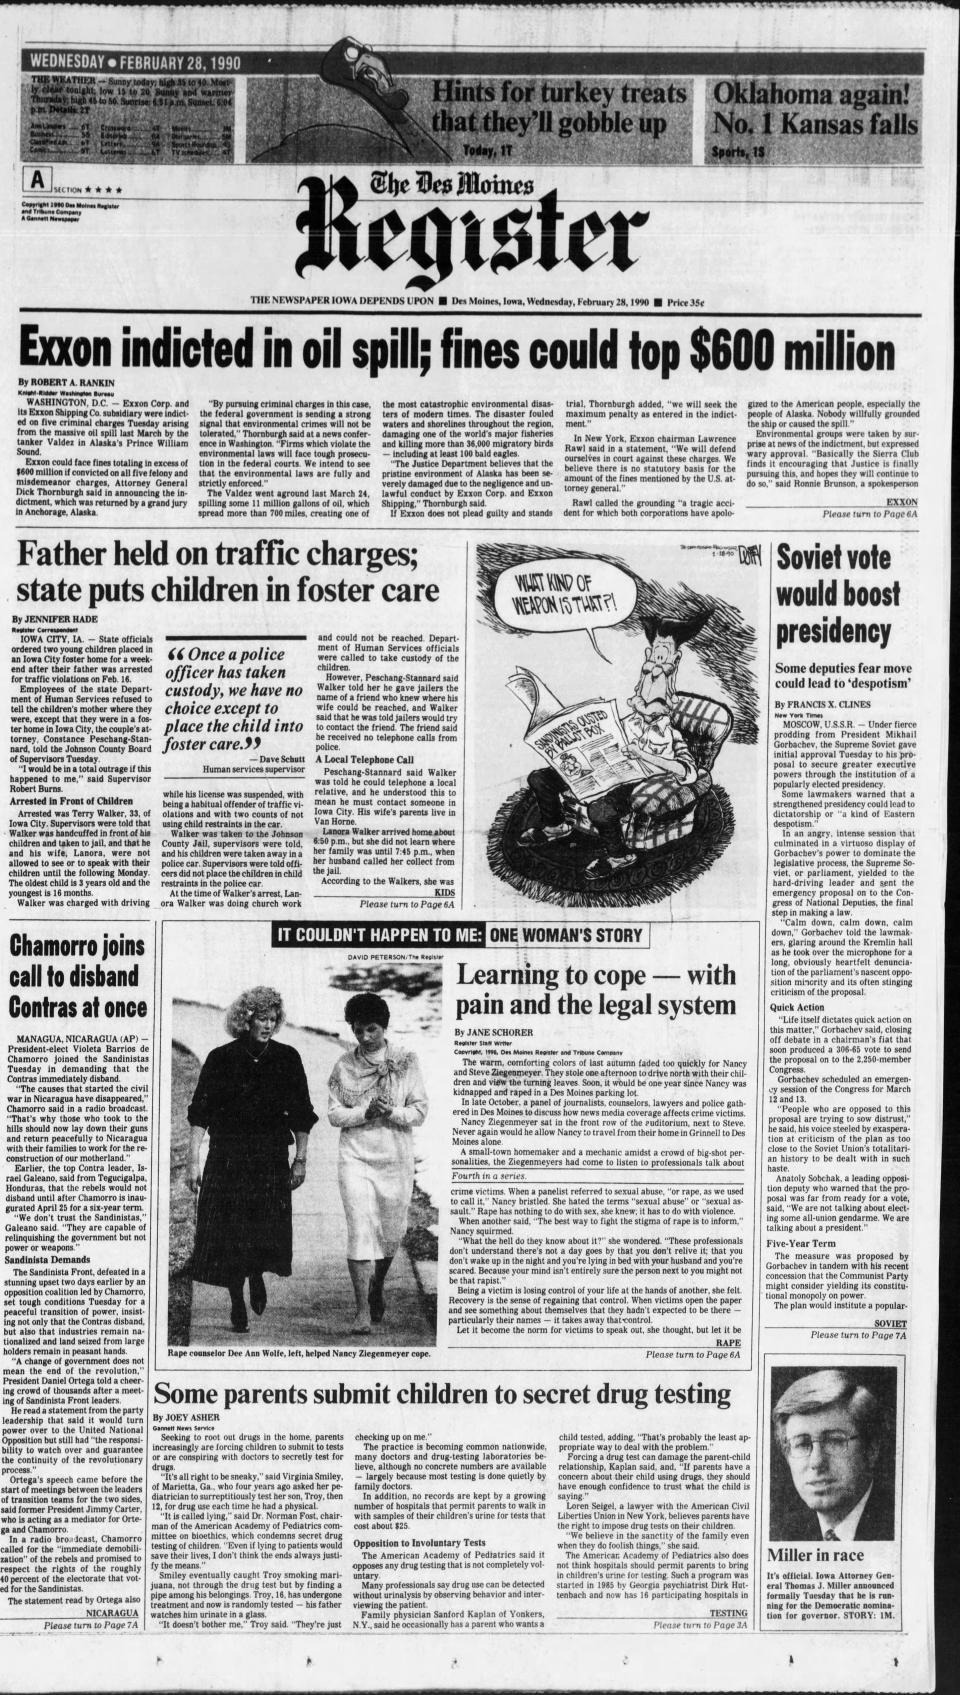 In a groundbreaking move, the Des Moines Register beginning Feb. 28, 1990, publishes an in-depth profile of a rape victim, and with her permission, includes her name and photos. Reporter Jane Schorer Meisner goes on to win a Pulitzer Prize for the five-part series.